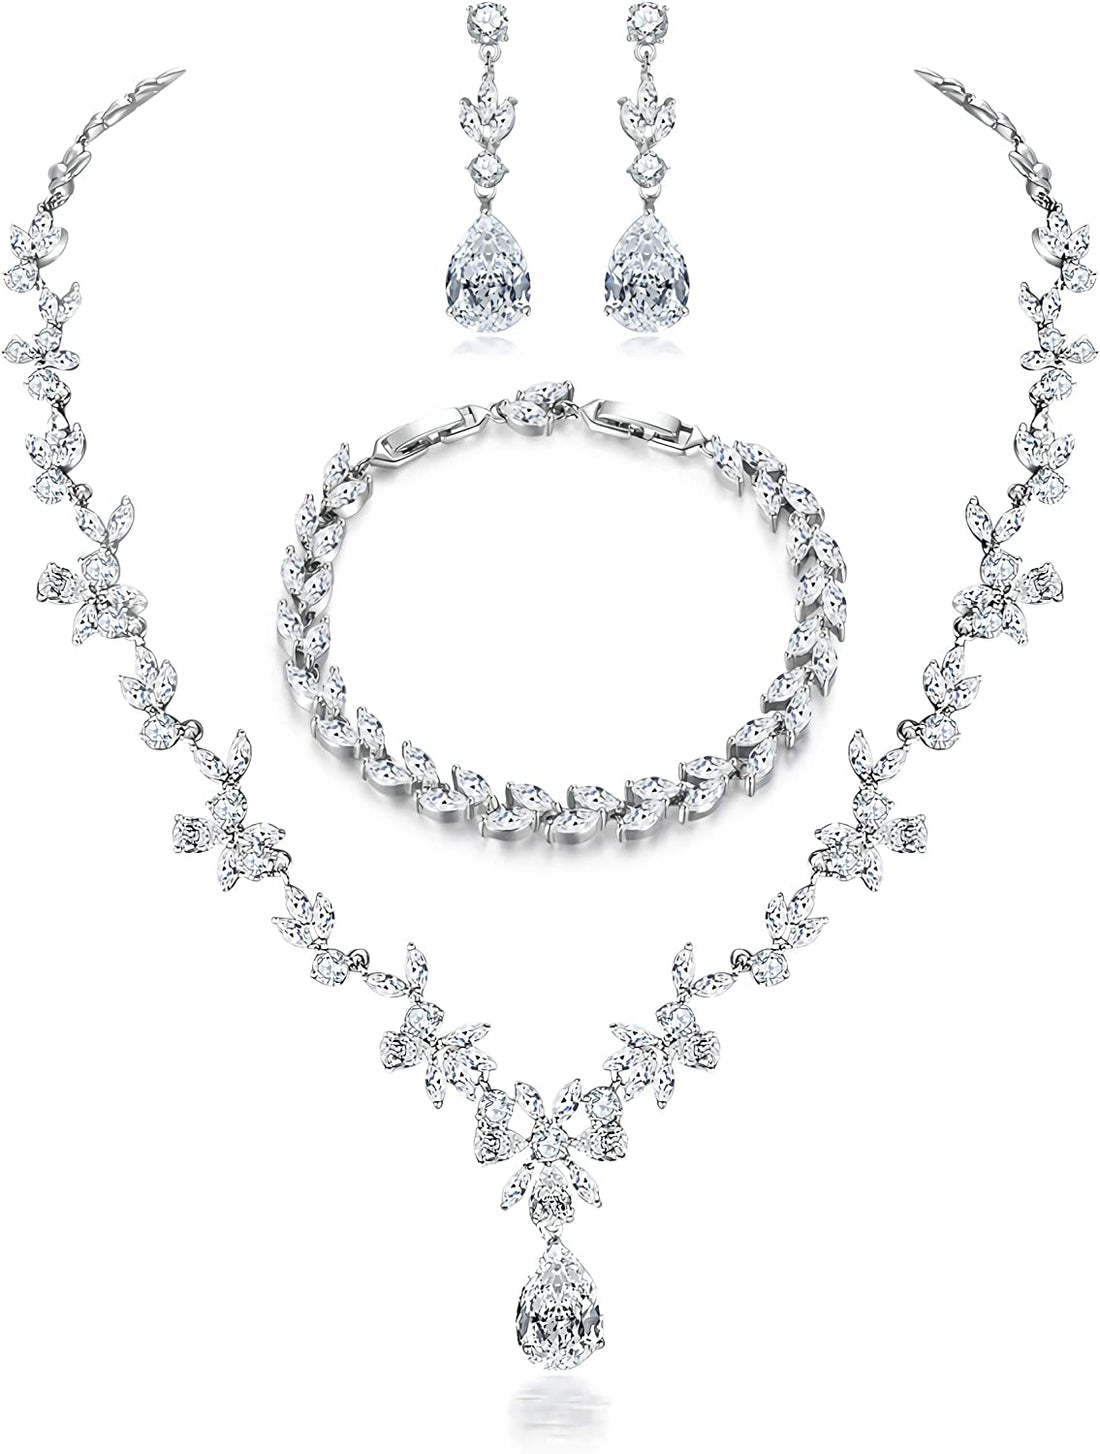 Shiny Silver Plated Bridal Jewelry Necklace &amp; Earrings Set